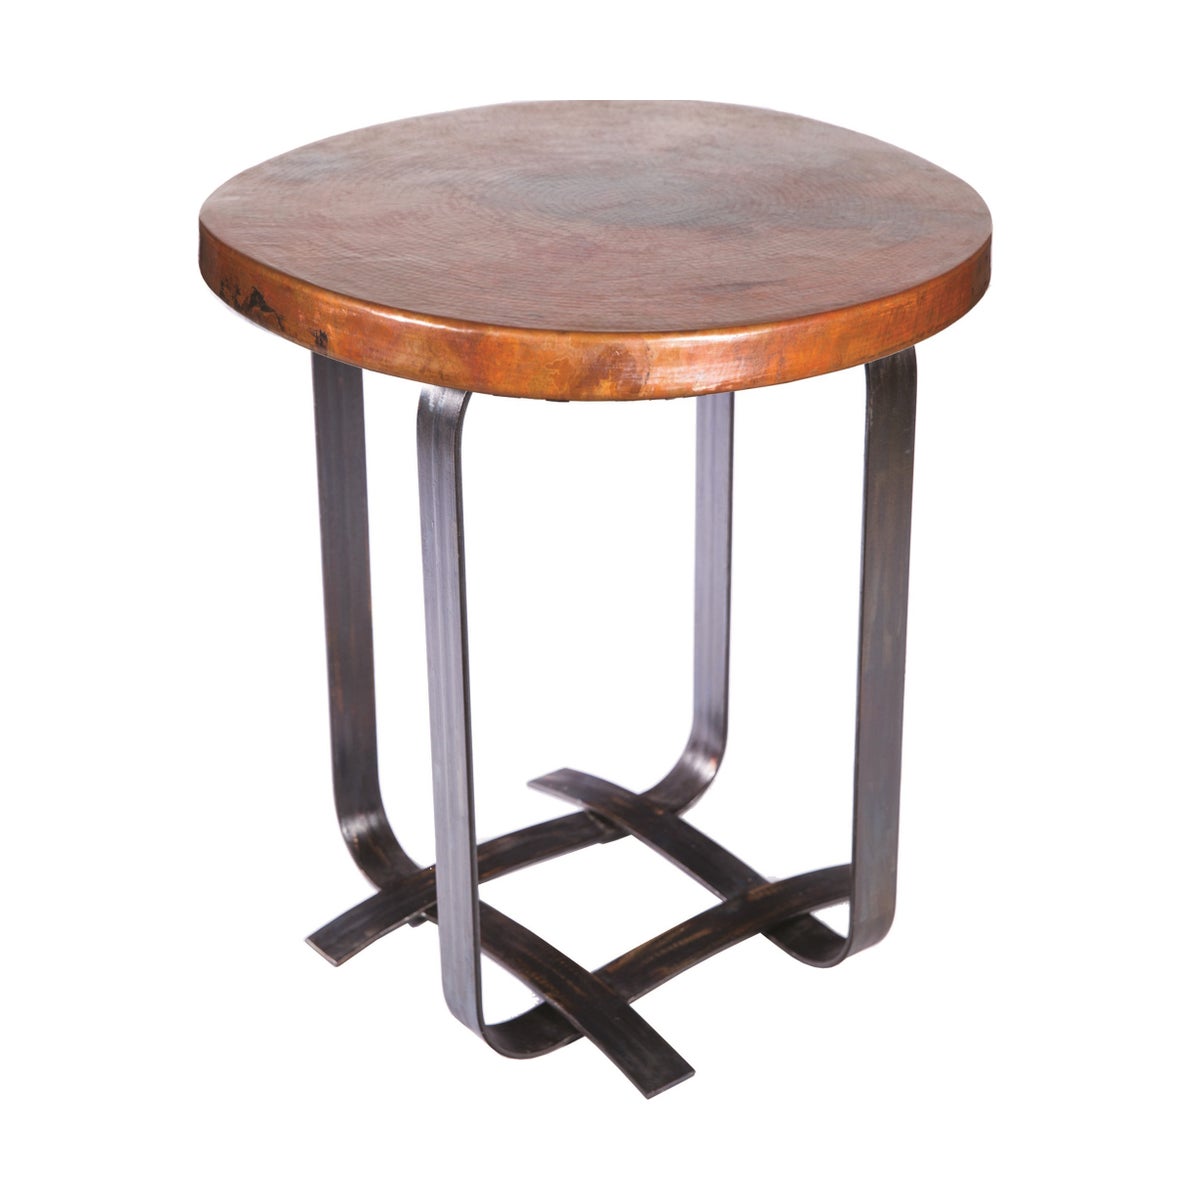 Douglas Basketweave Side Table with Hammered Copper Top